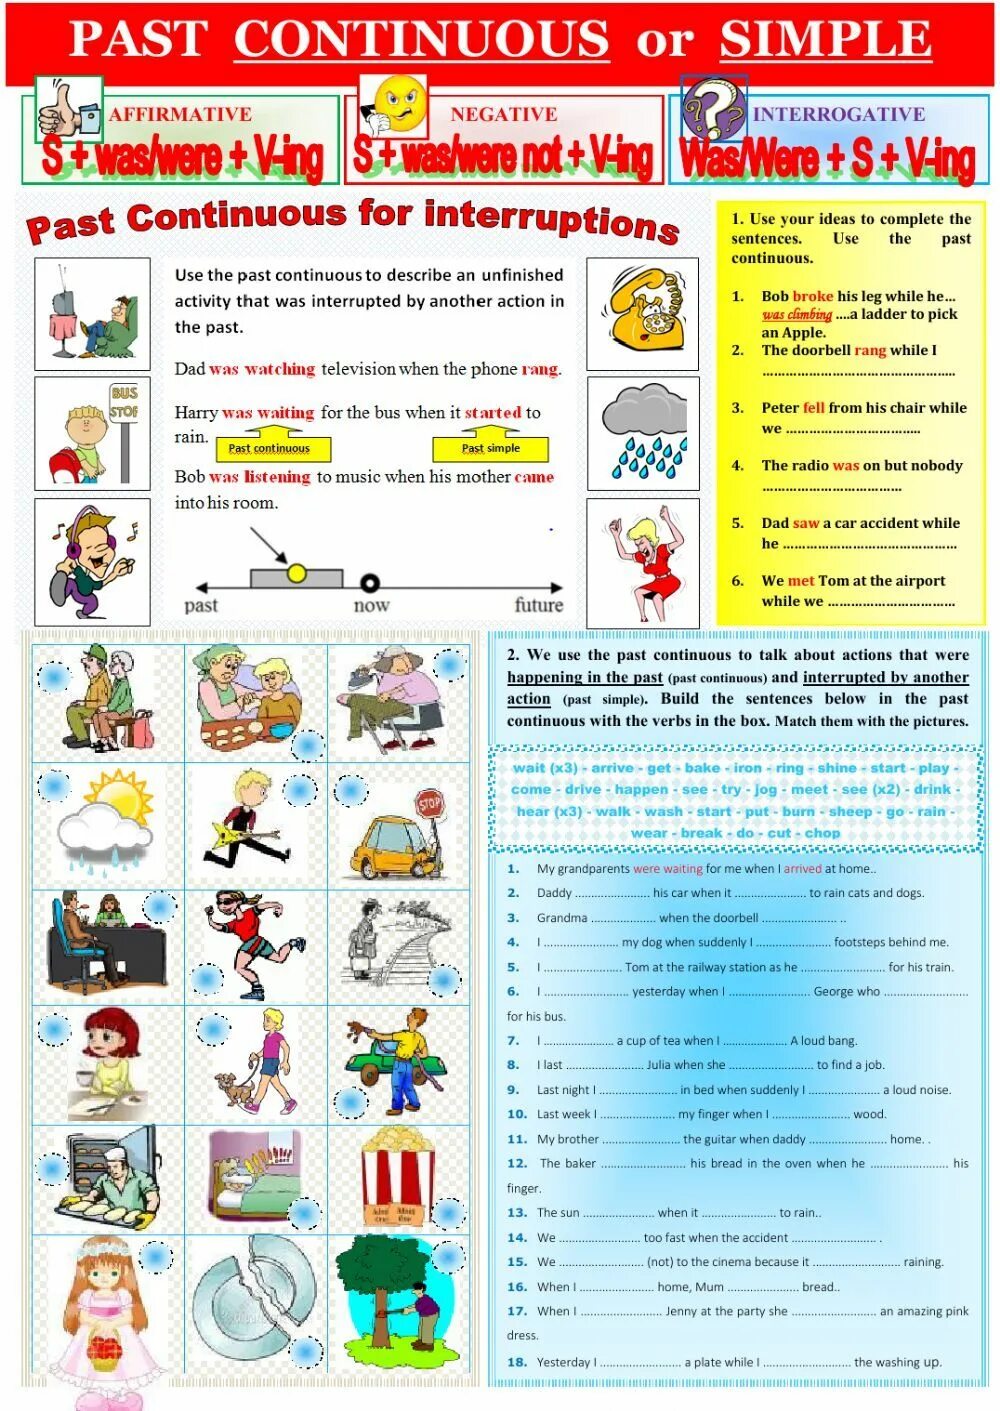 Complete the ideas. Past Continuous Worksheets. Past simple vs past Continuous. Past simple past Continuous Worksheets. Past Continuous интересные задания.